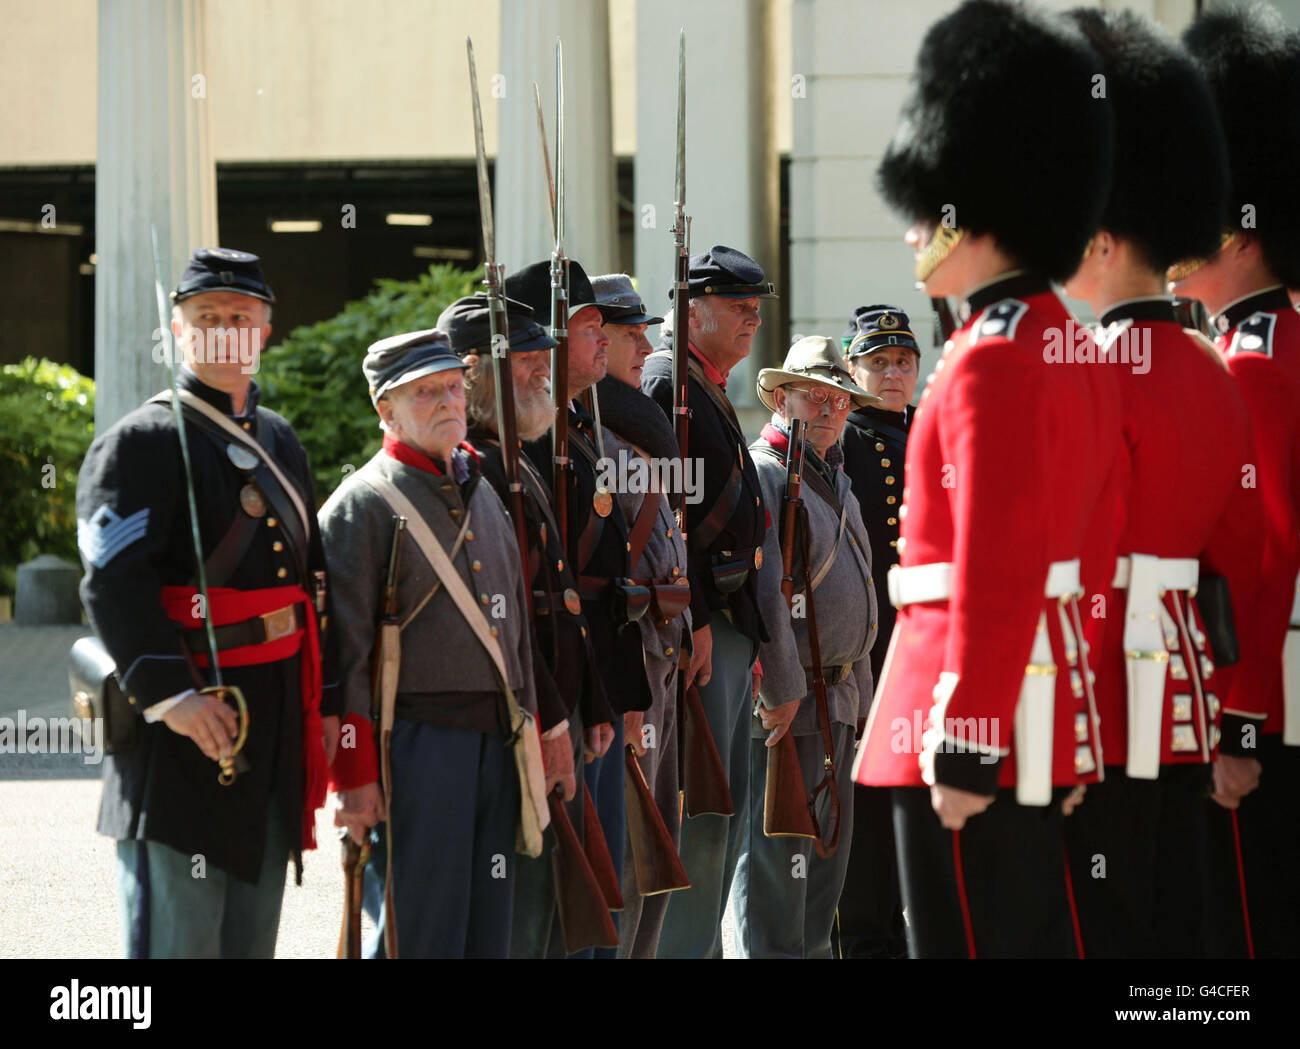 Members of The Southern Skirmish Association (SoSkAn) American Civil War Re-enactment Society with soldiers from the Grenadier Guards, during the launch of The British Military Tournament at Wellington Barracks in central London. Stock Photo